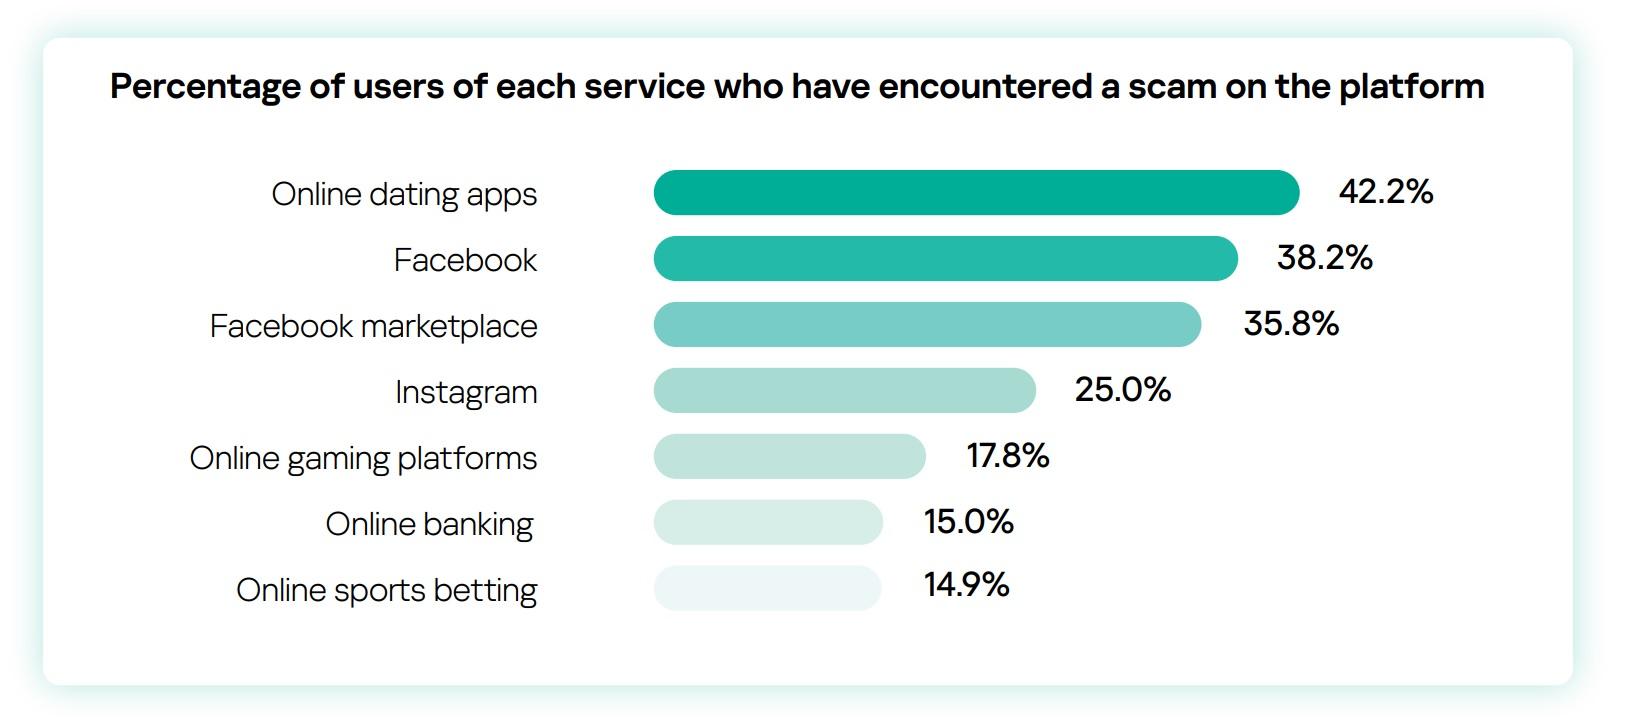 Percentage of users of each service who have encountered a scam on the platform